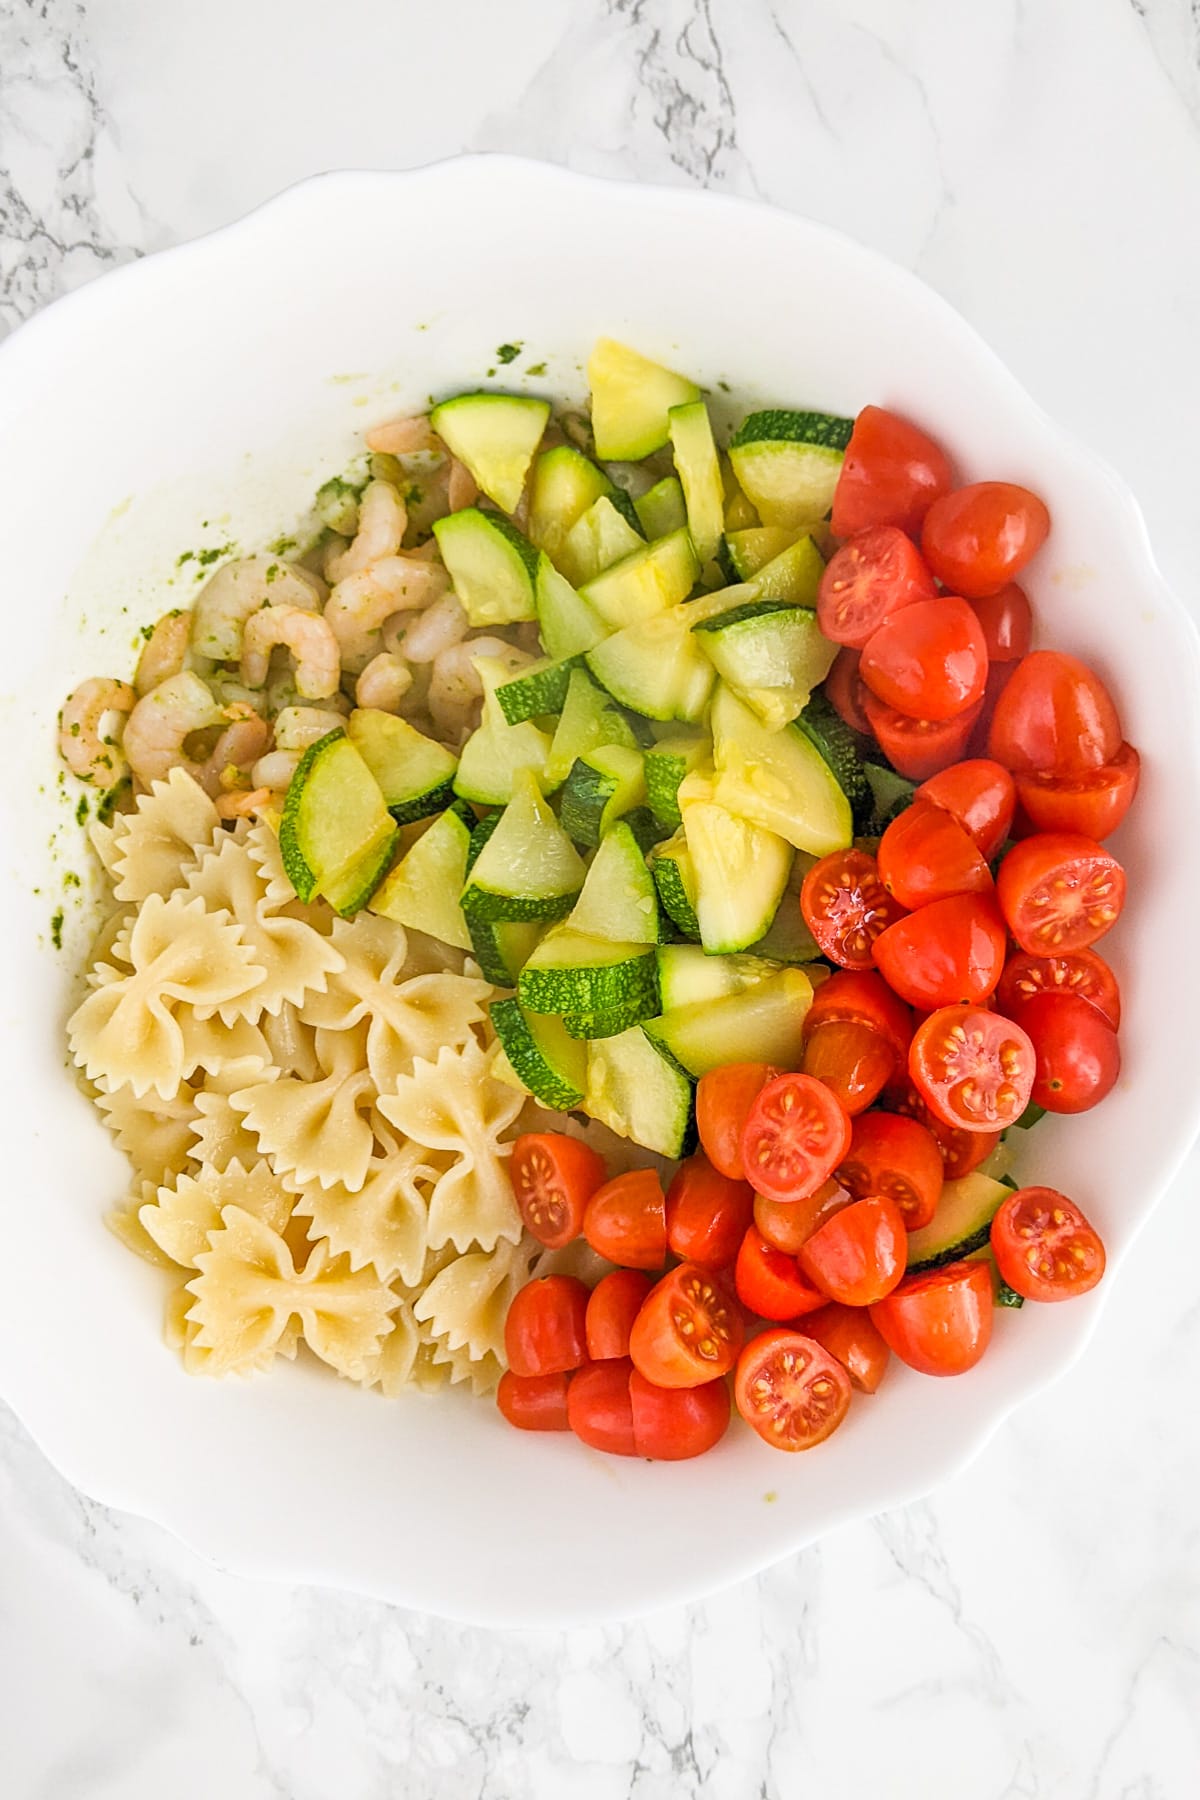 Top view of sliced zucchini, cherry tomatoes, boiled pasta and shrimp.